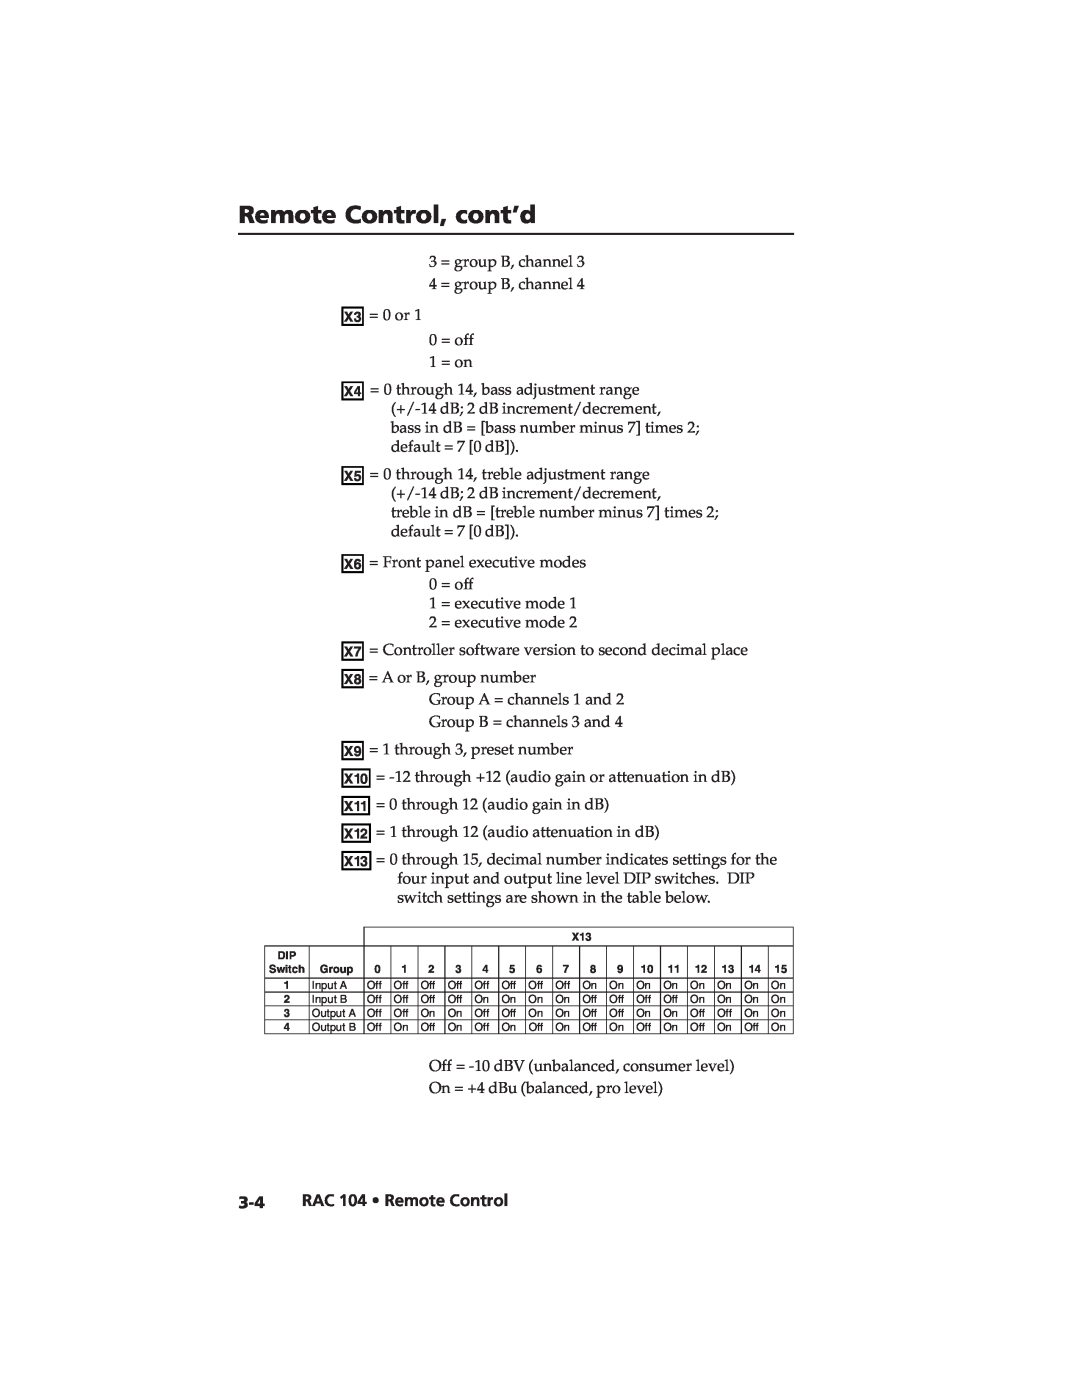 Extron electronic user manual Remote Control, cont’d, RAC 104 Remote Control 